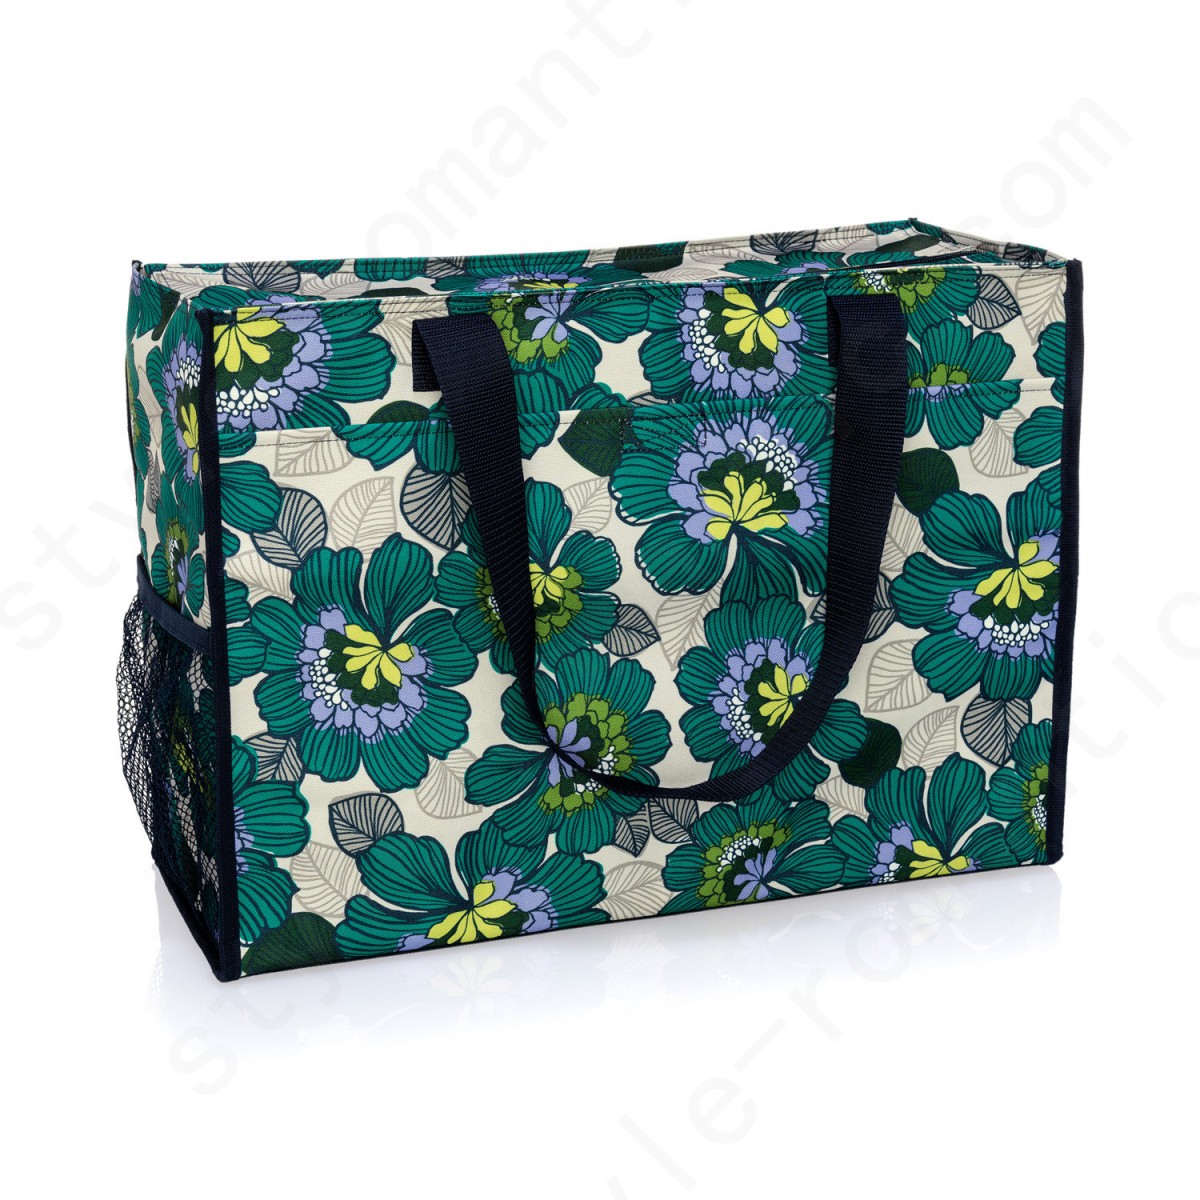 Thirty-One Gifts Deluxe Organizing Utility Tote - Garden Party Bag Accessories - -0